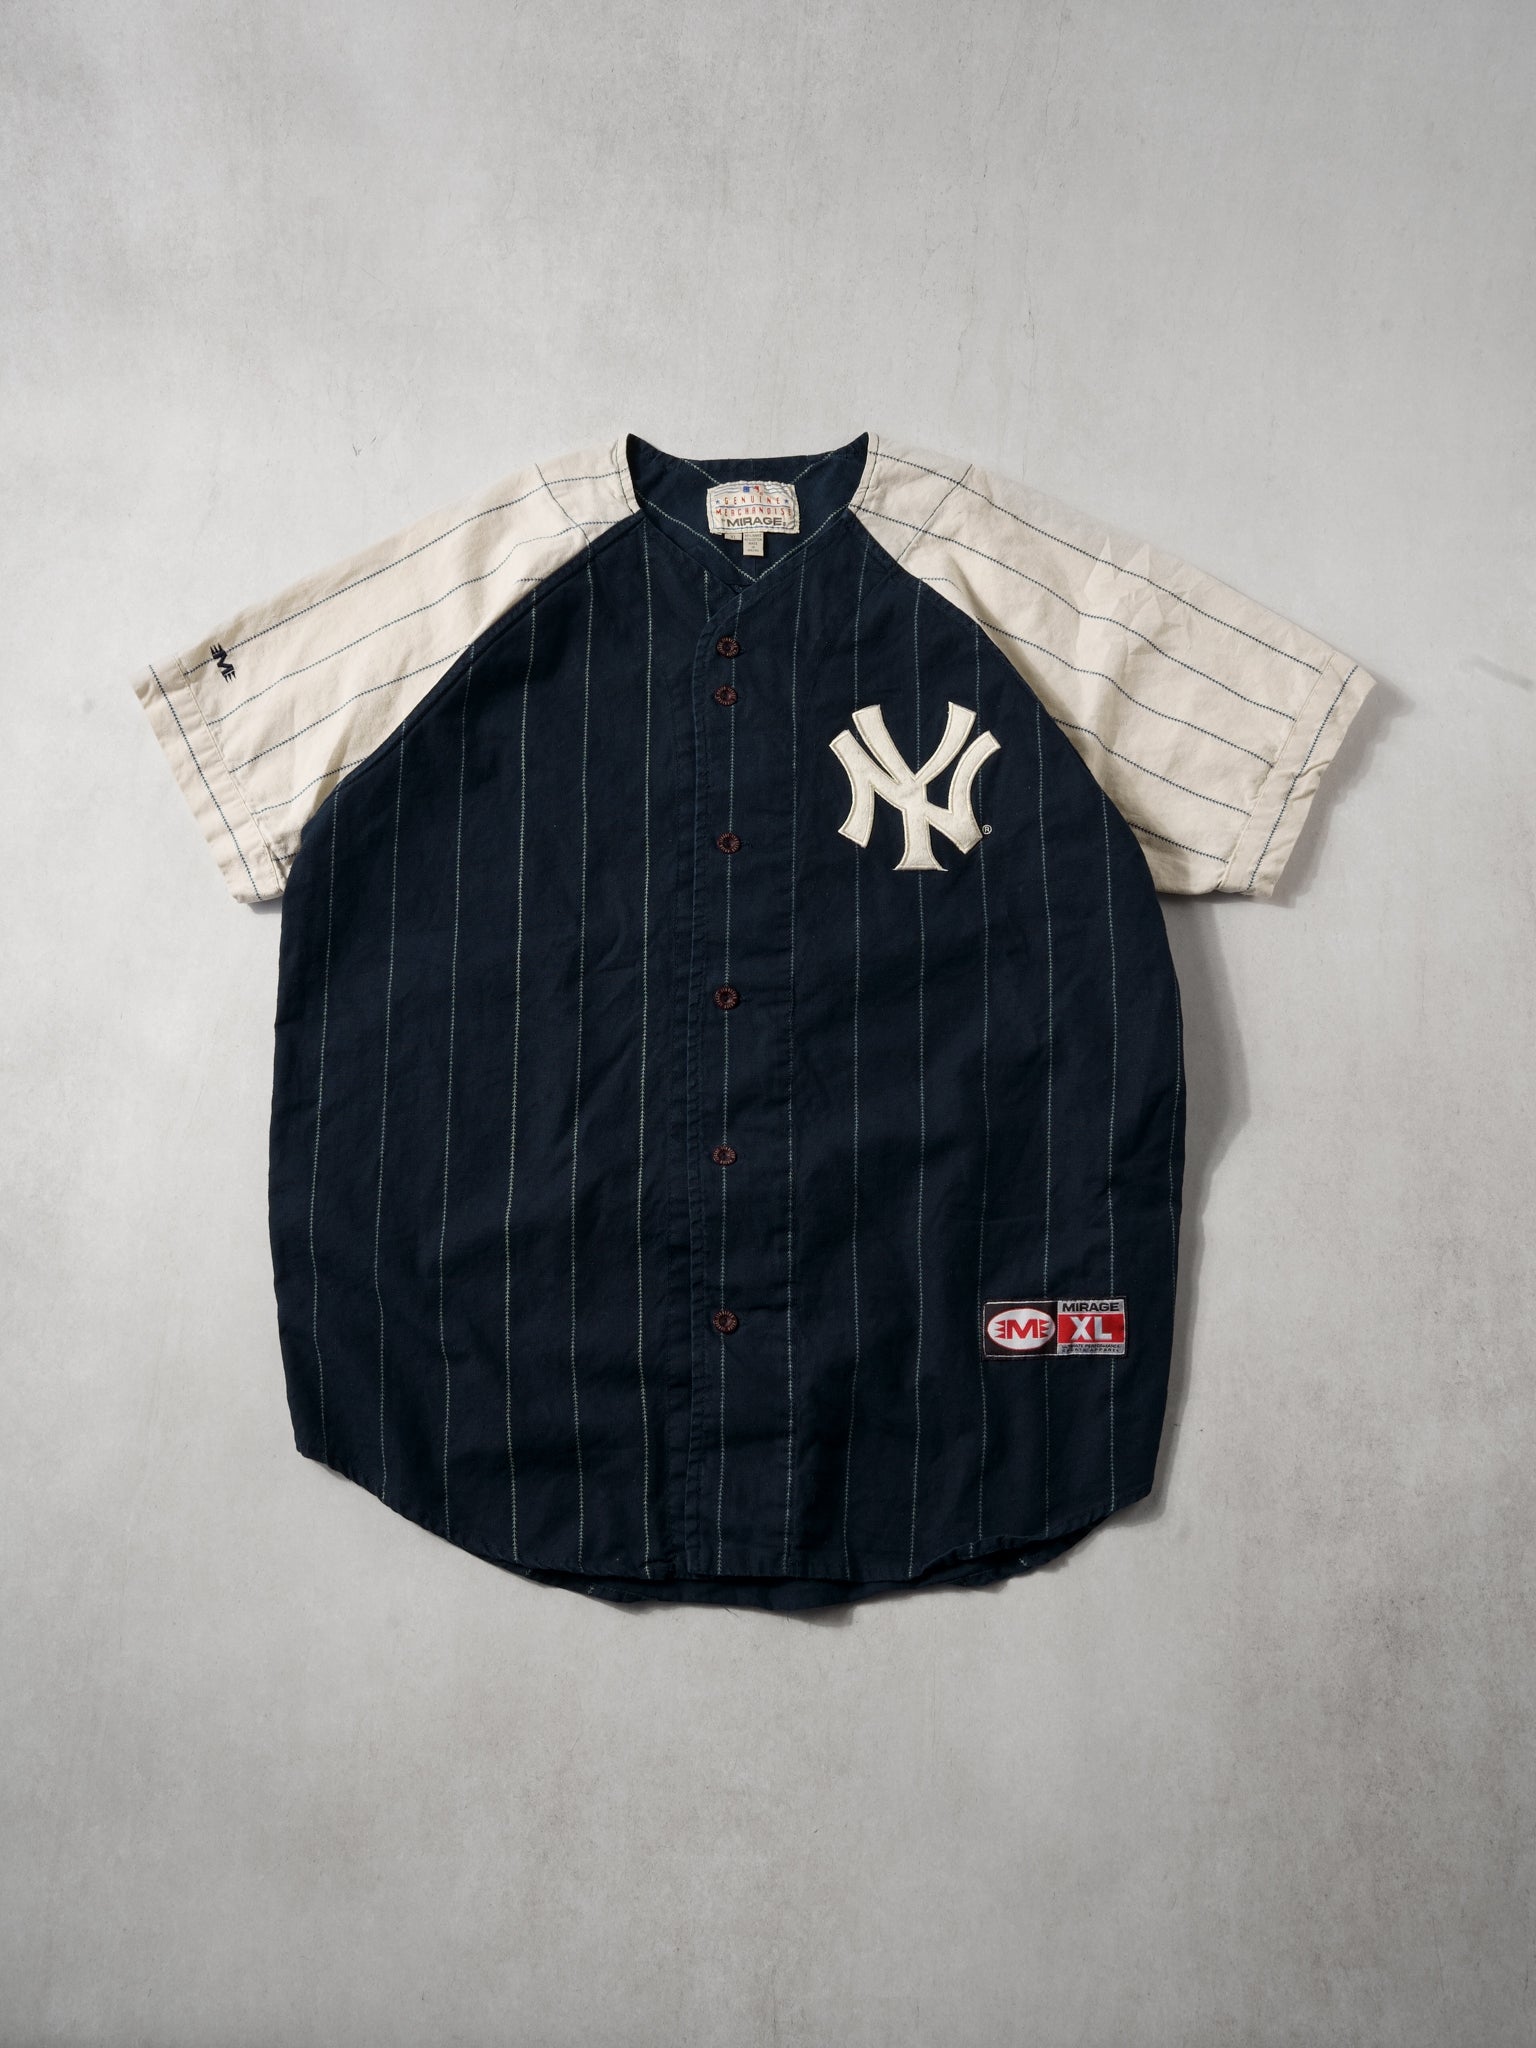 Vintage 90s Navy Blue and White Striped New York Yankees Baseball Jersey (L)